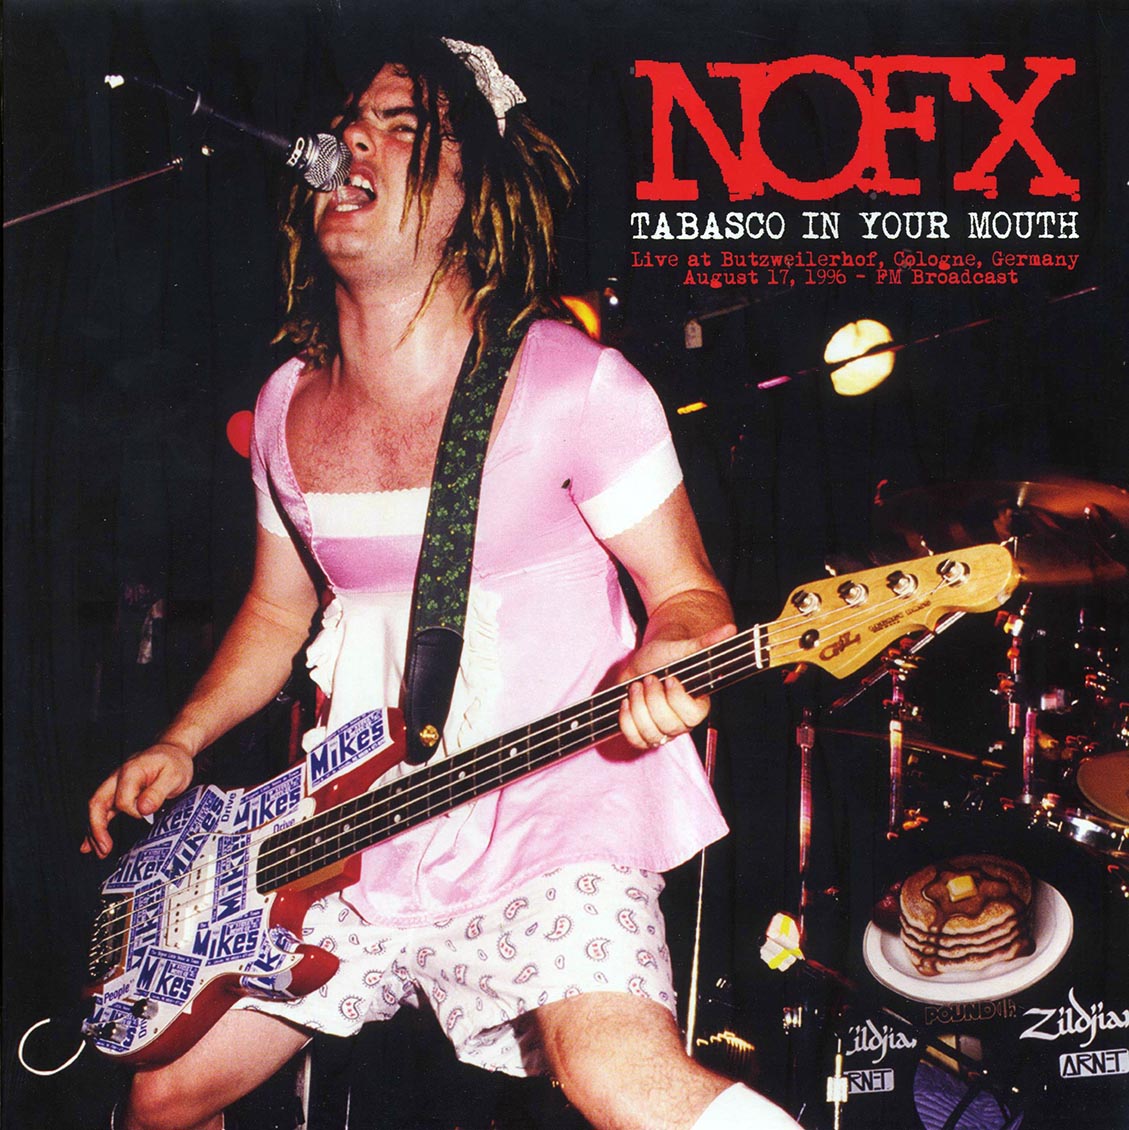 NOFX - Tabasco In Your Mouth: Live At Butzweilerhof, Cologne, Germany August 17, 1996 - Vinyl LP